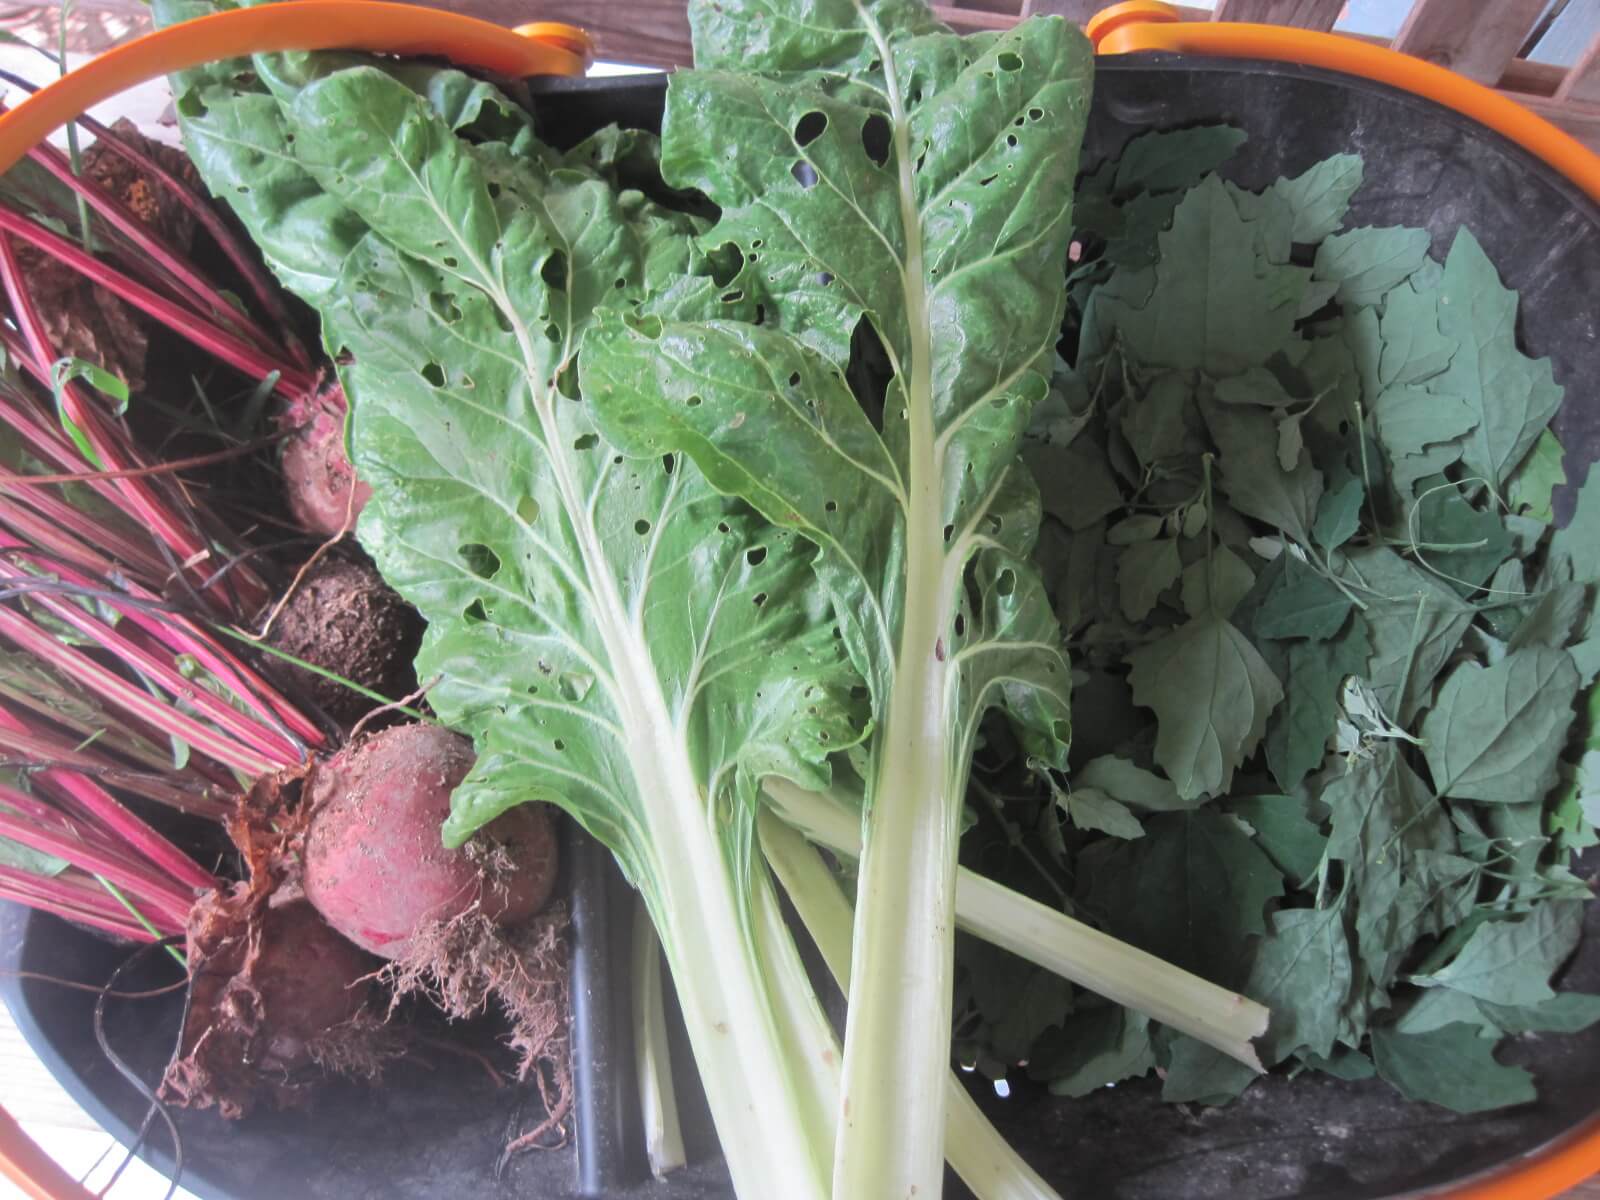 chard and turnips in strainer